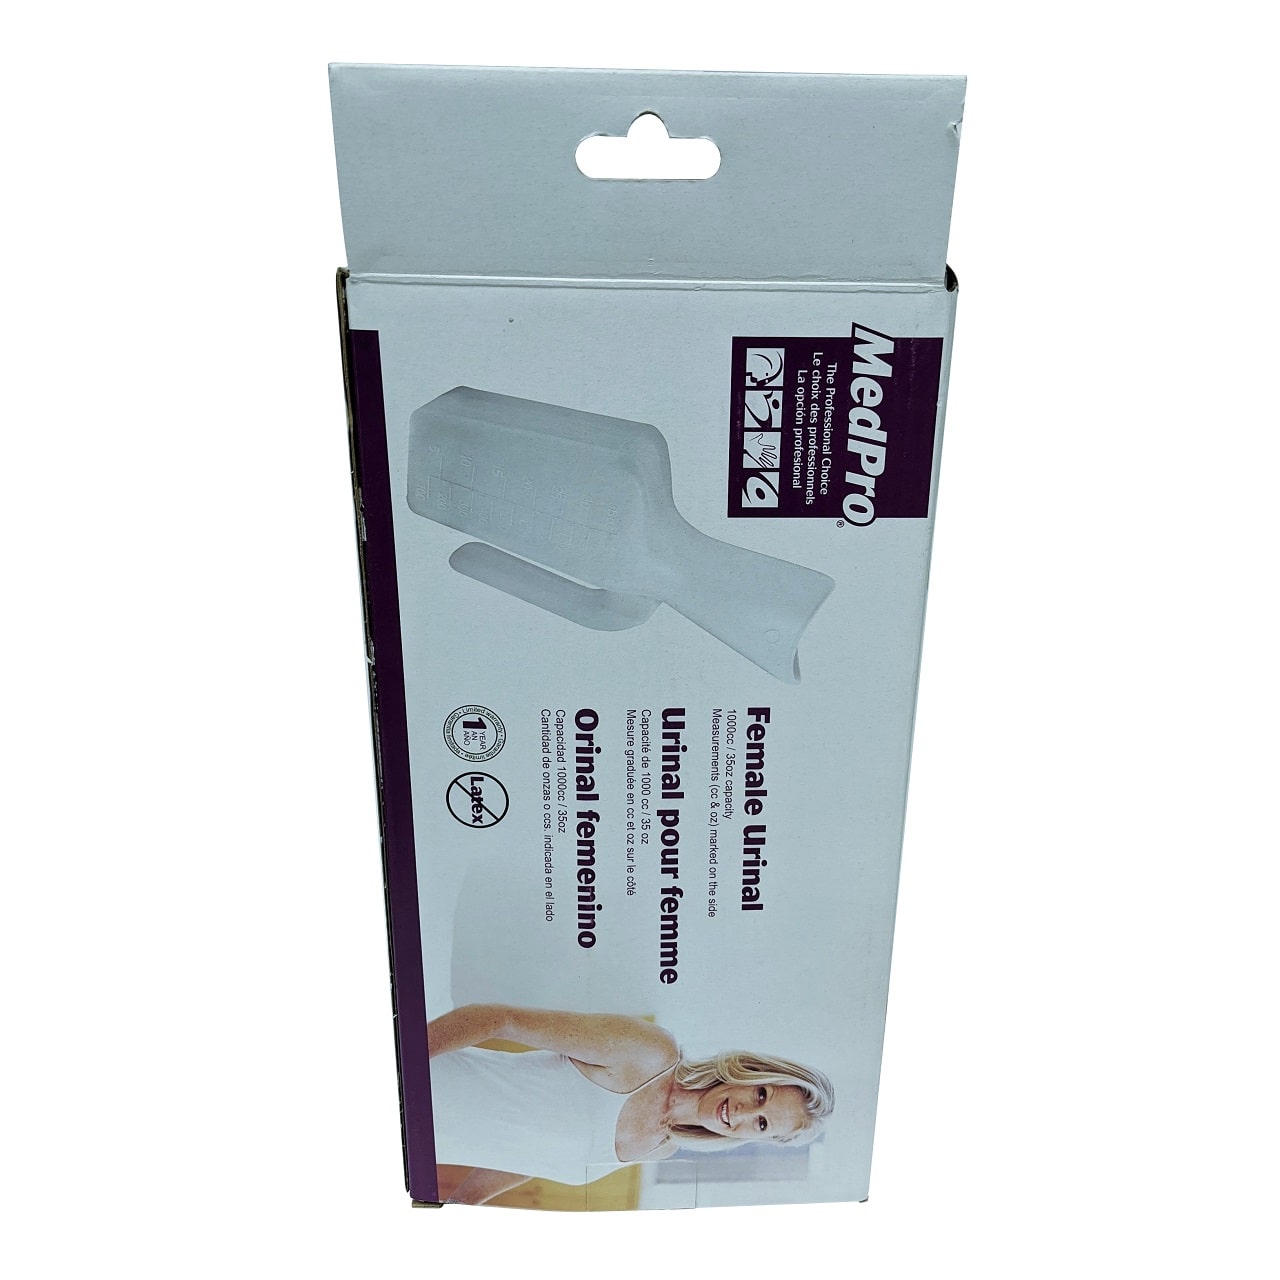 Product label for MedPro Female Urinal (1L capacity)